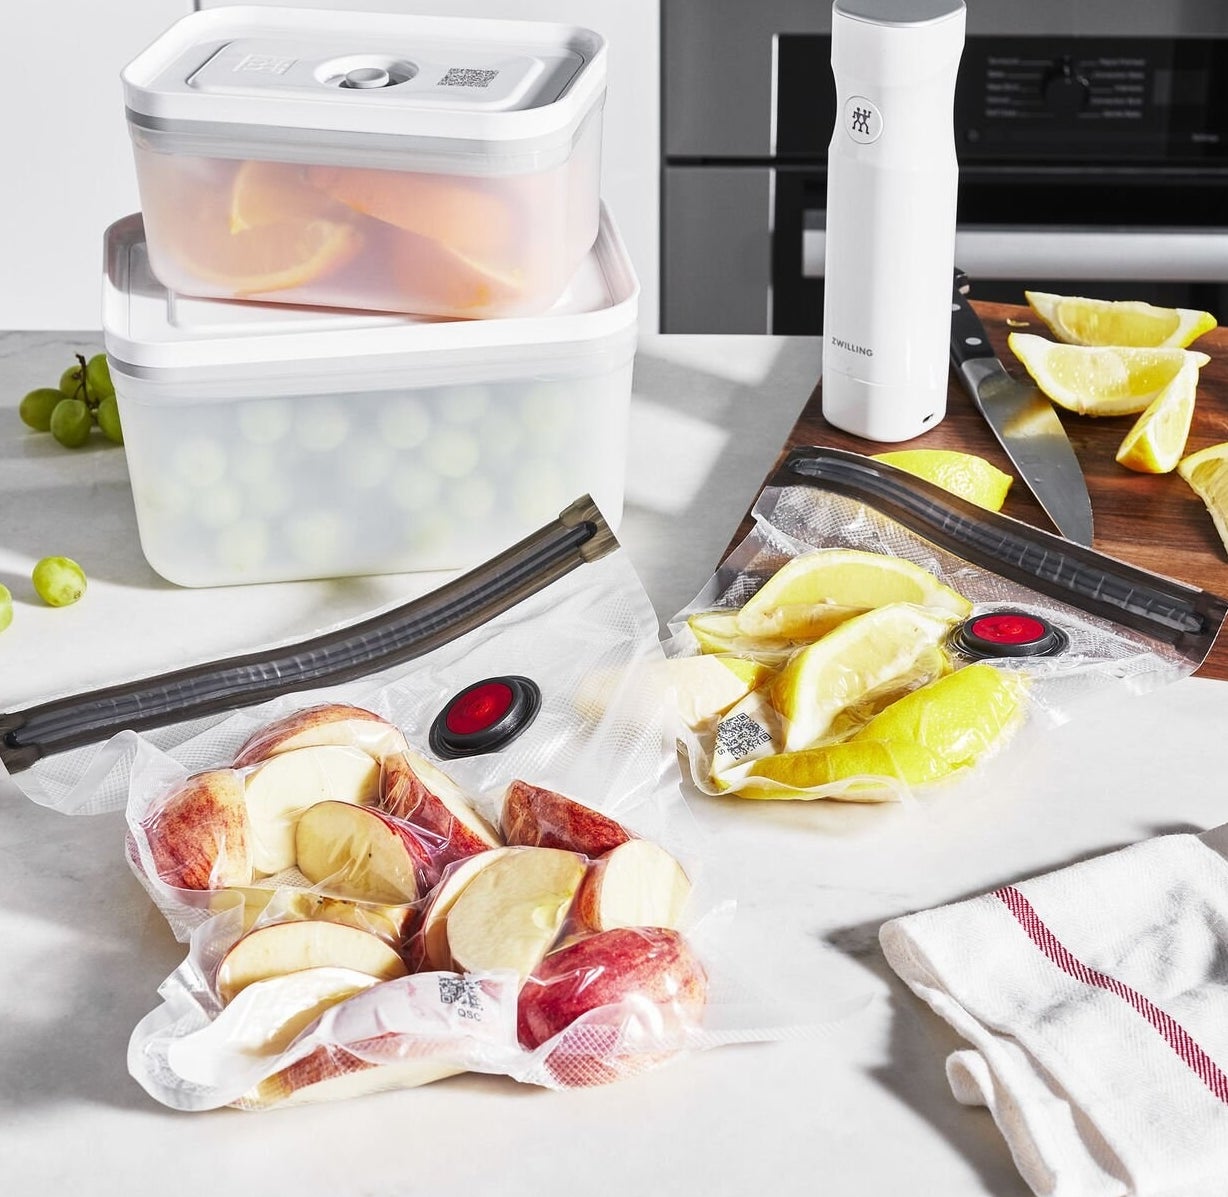 the vacuum sealer, two containers filled with fruit, and bag filled with apples and lemons 